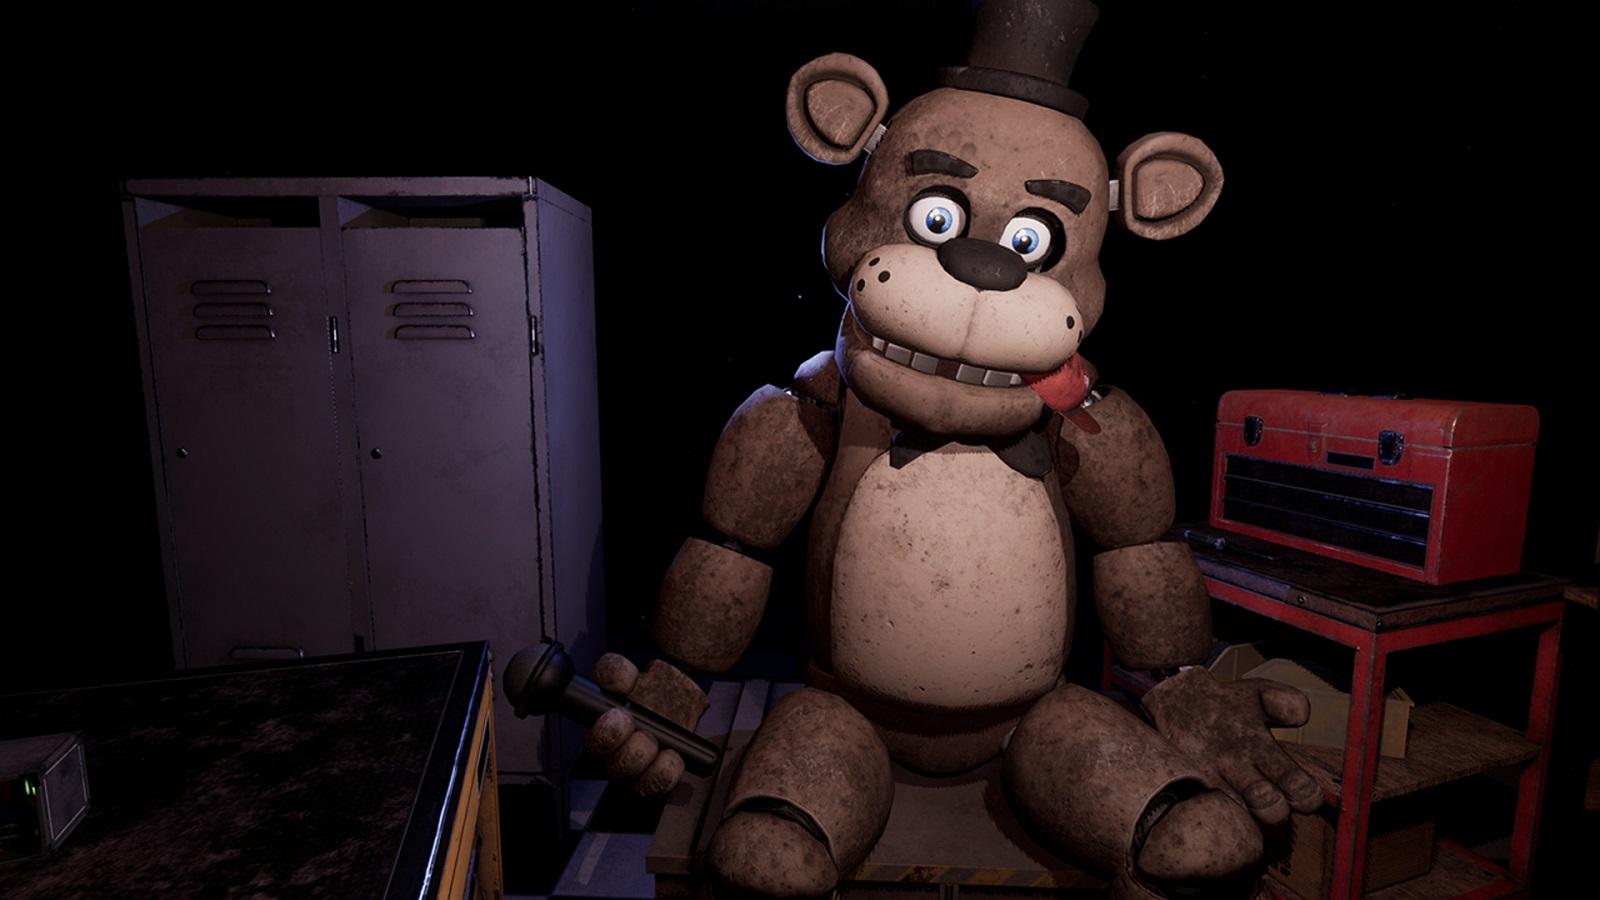 We would love ya to join us for a bite, Five Nights at Freddy's VR